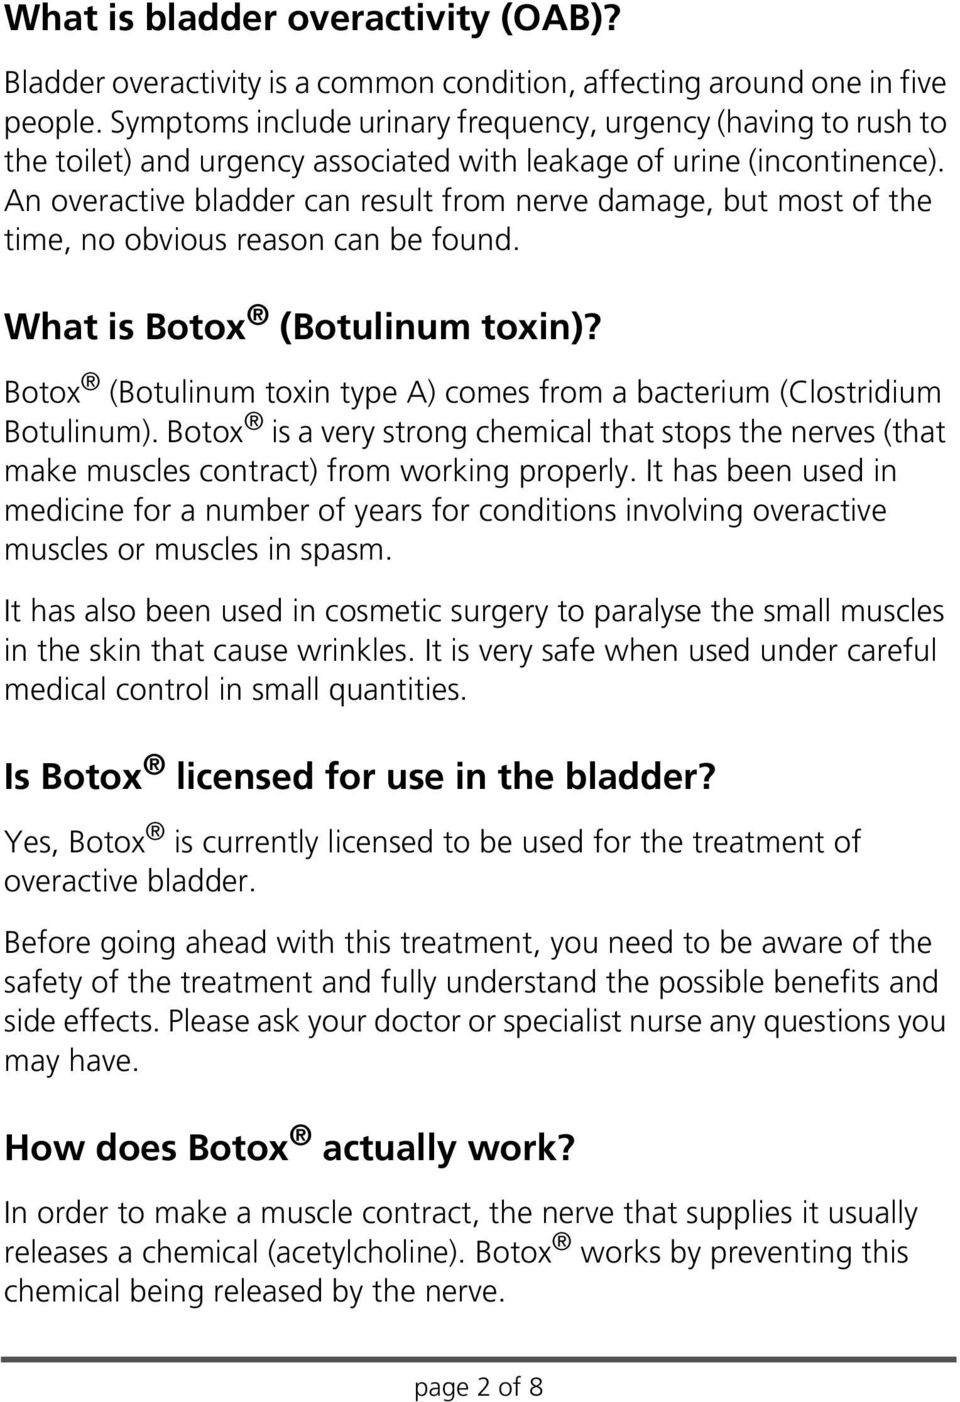 An overactive bladder can result from nerve damage, but most of the time, no obvious reason can be found. What is Botox (Botulinum toxin)?